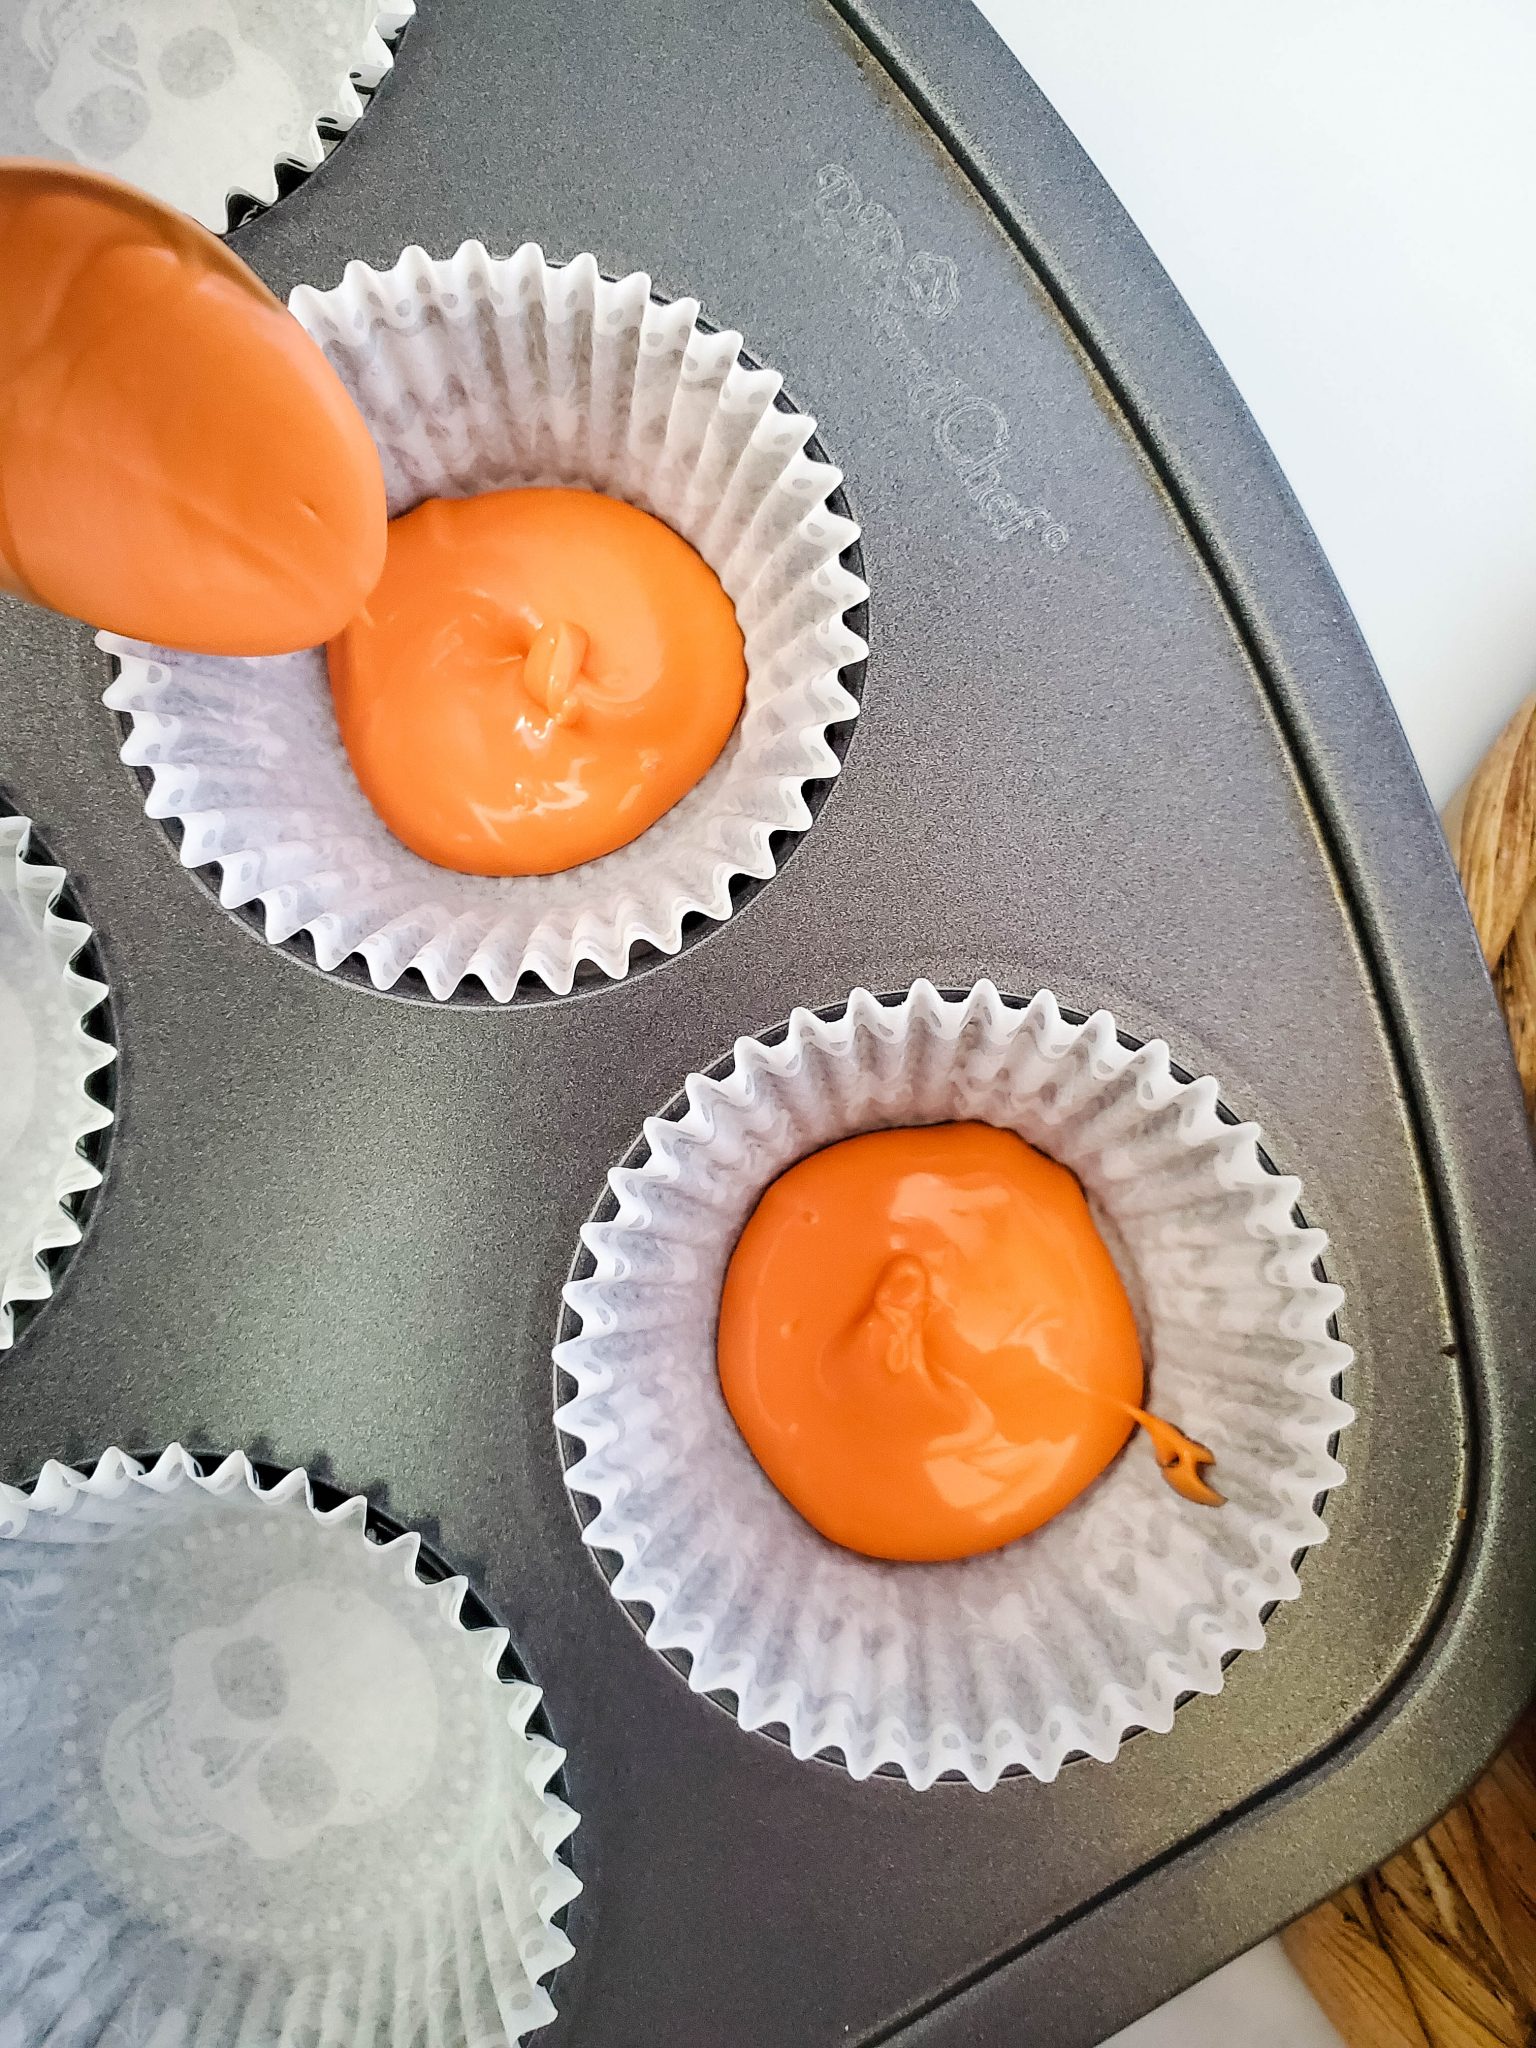 Easy Homemade Peanut Butter Cups for Fall